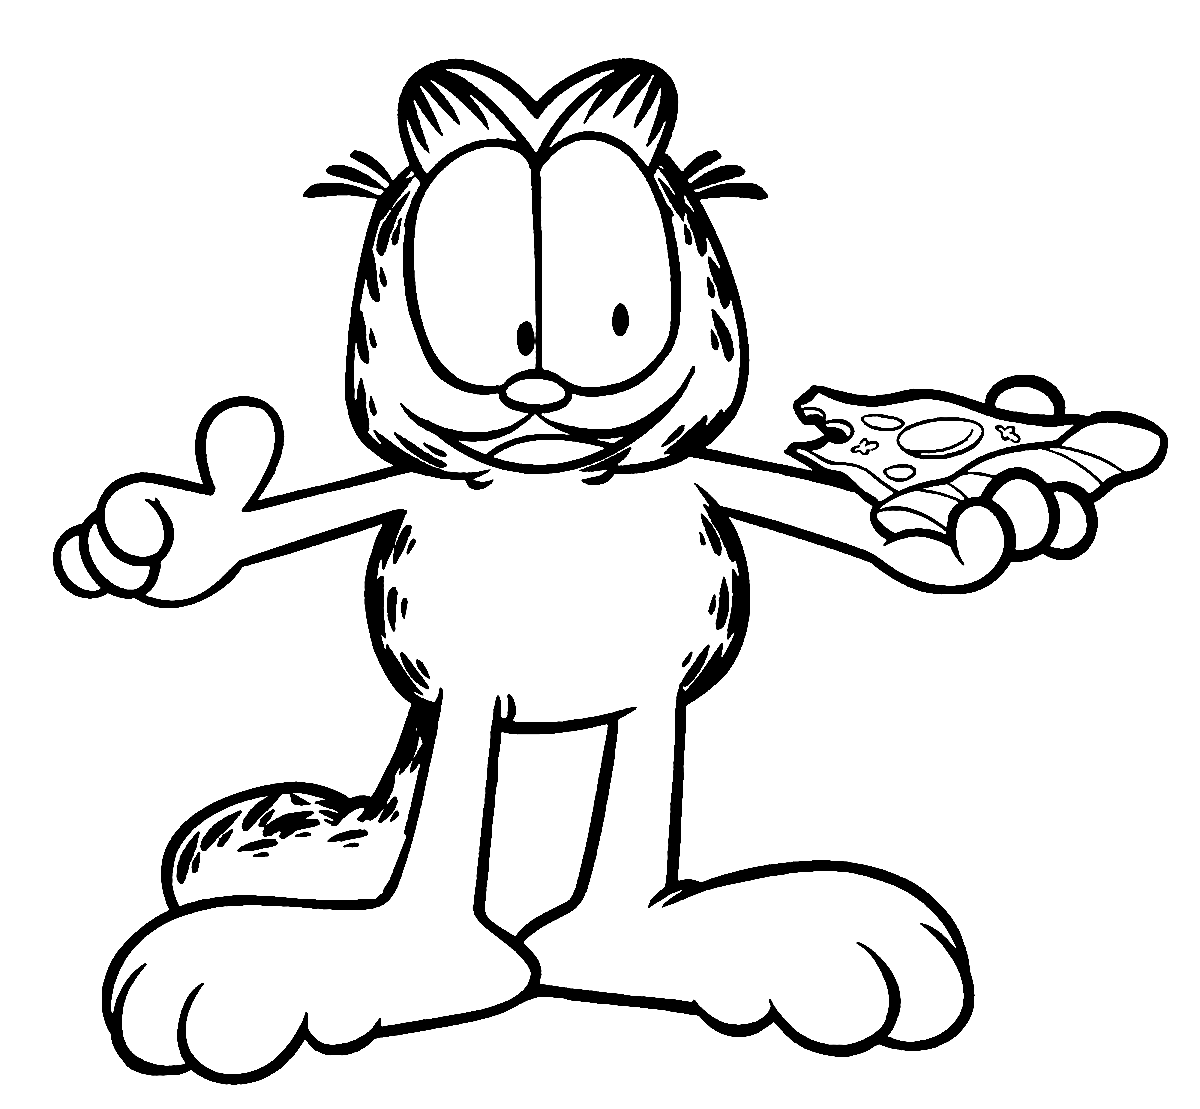 Coloring Page of Garfield With His Pizza